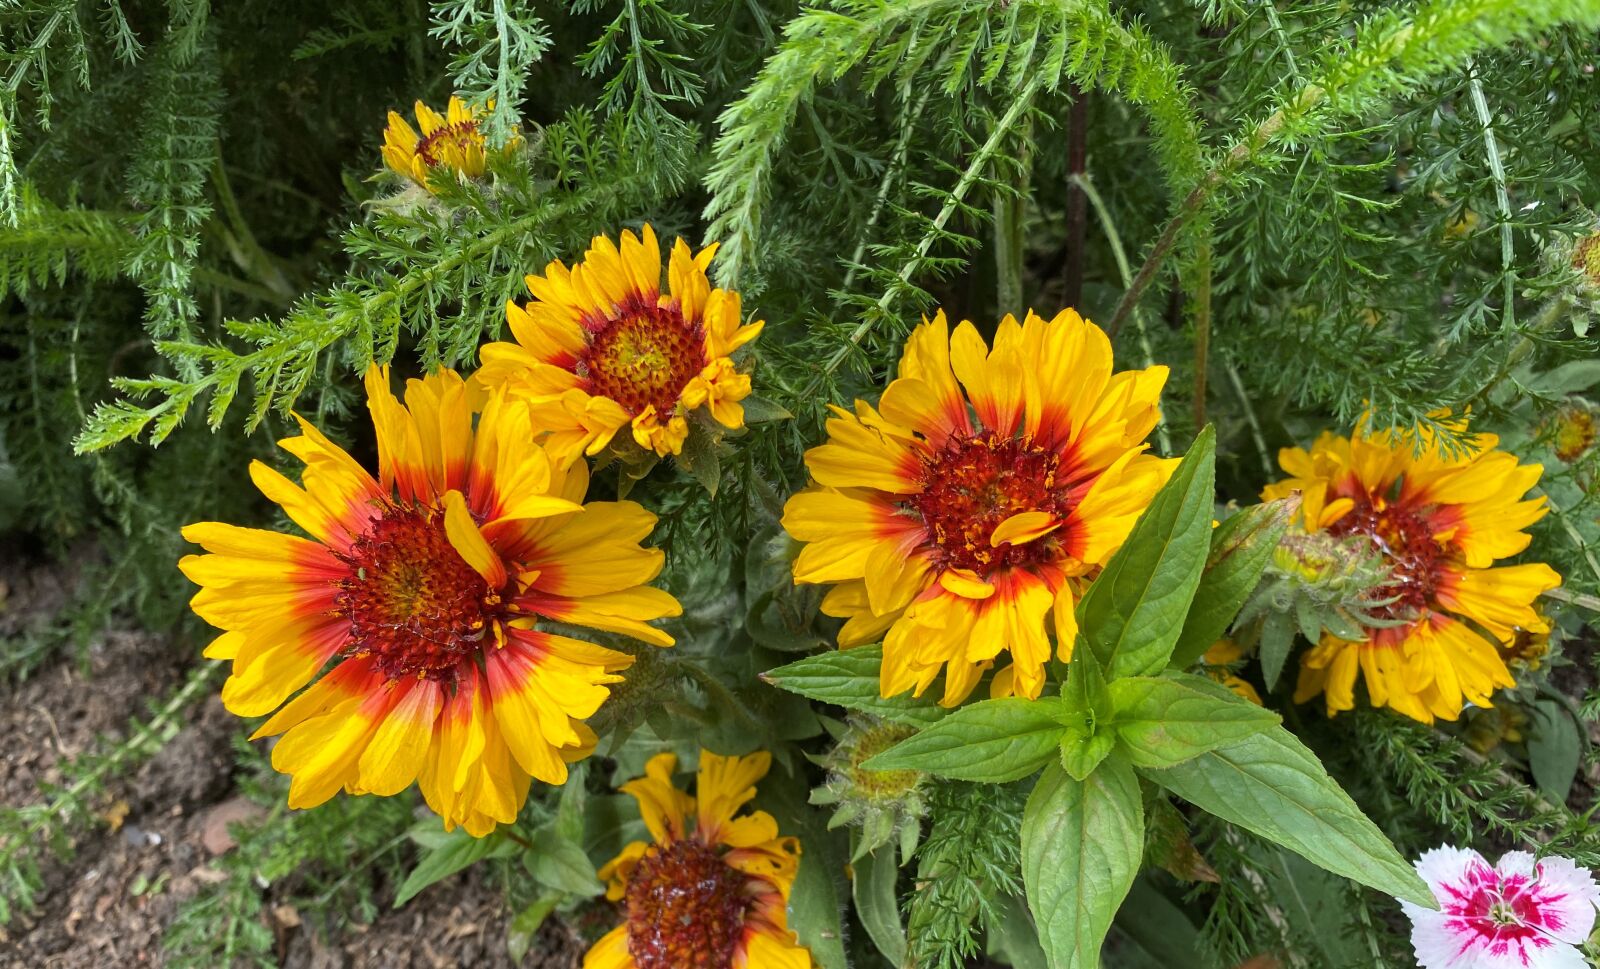 iPhone 11 back dual wide camera 4.25mm f/1.8 sample photo. Blanket flower, garden, green photography